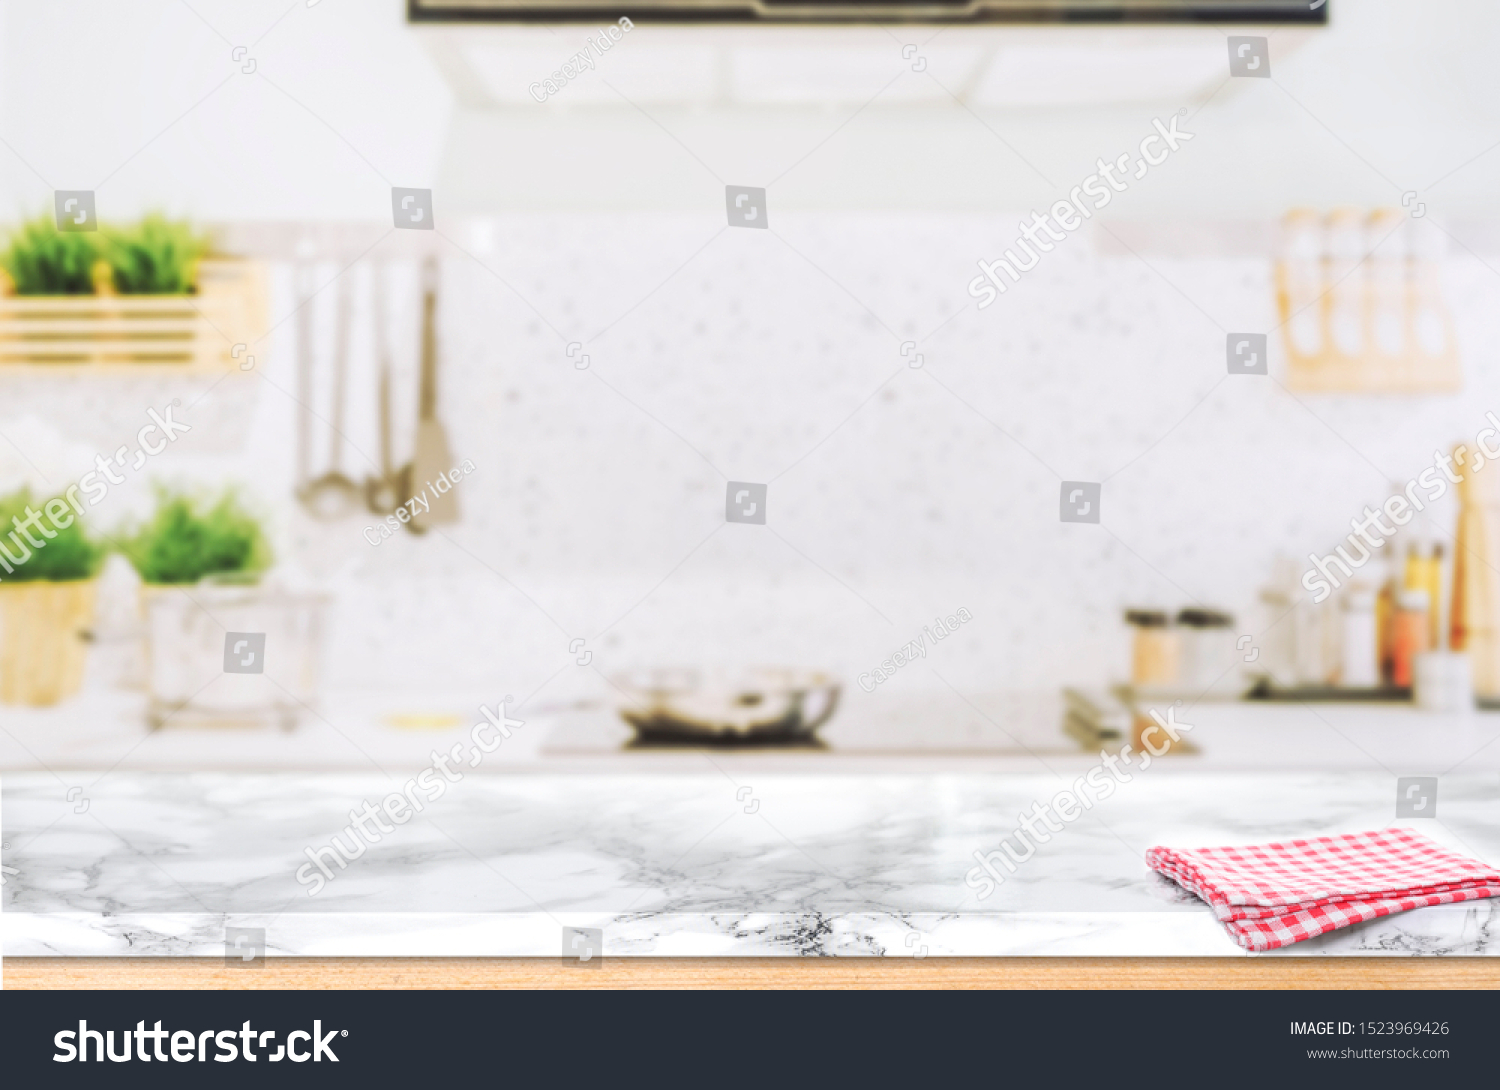 Wood table top on blurred kitchen background #1523969426